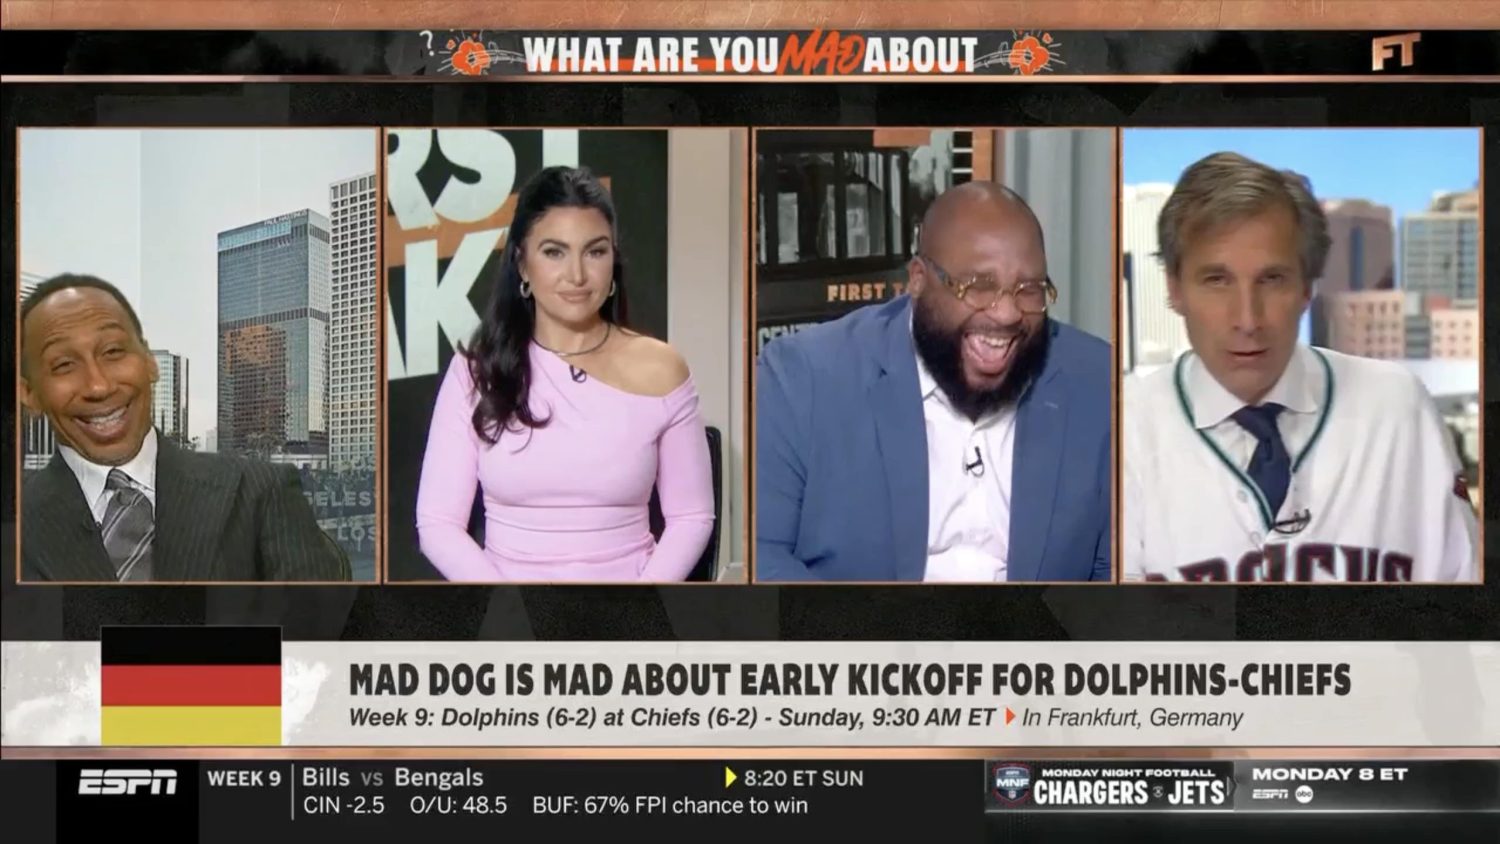 Stephen A. Smith, Molly Qerim, Marcus Spears and Chris Russo on First Take